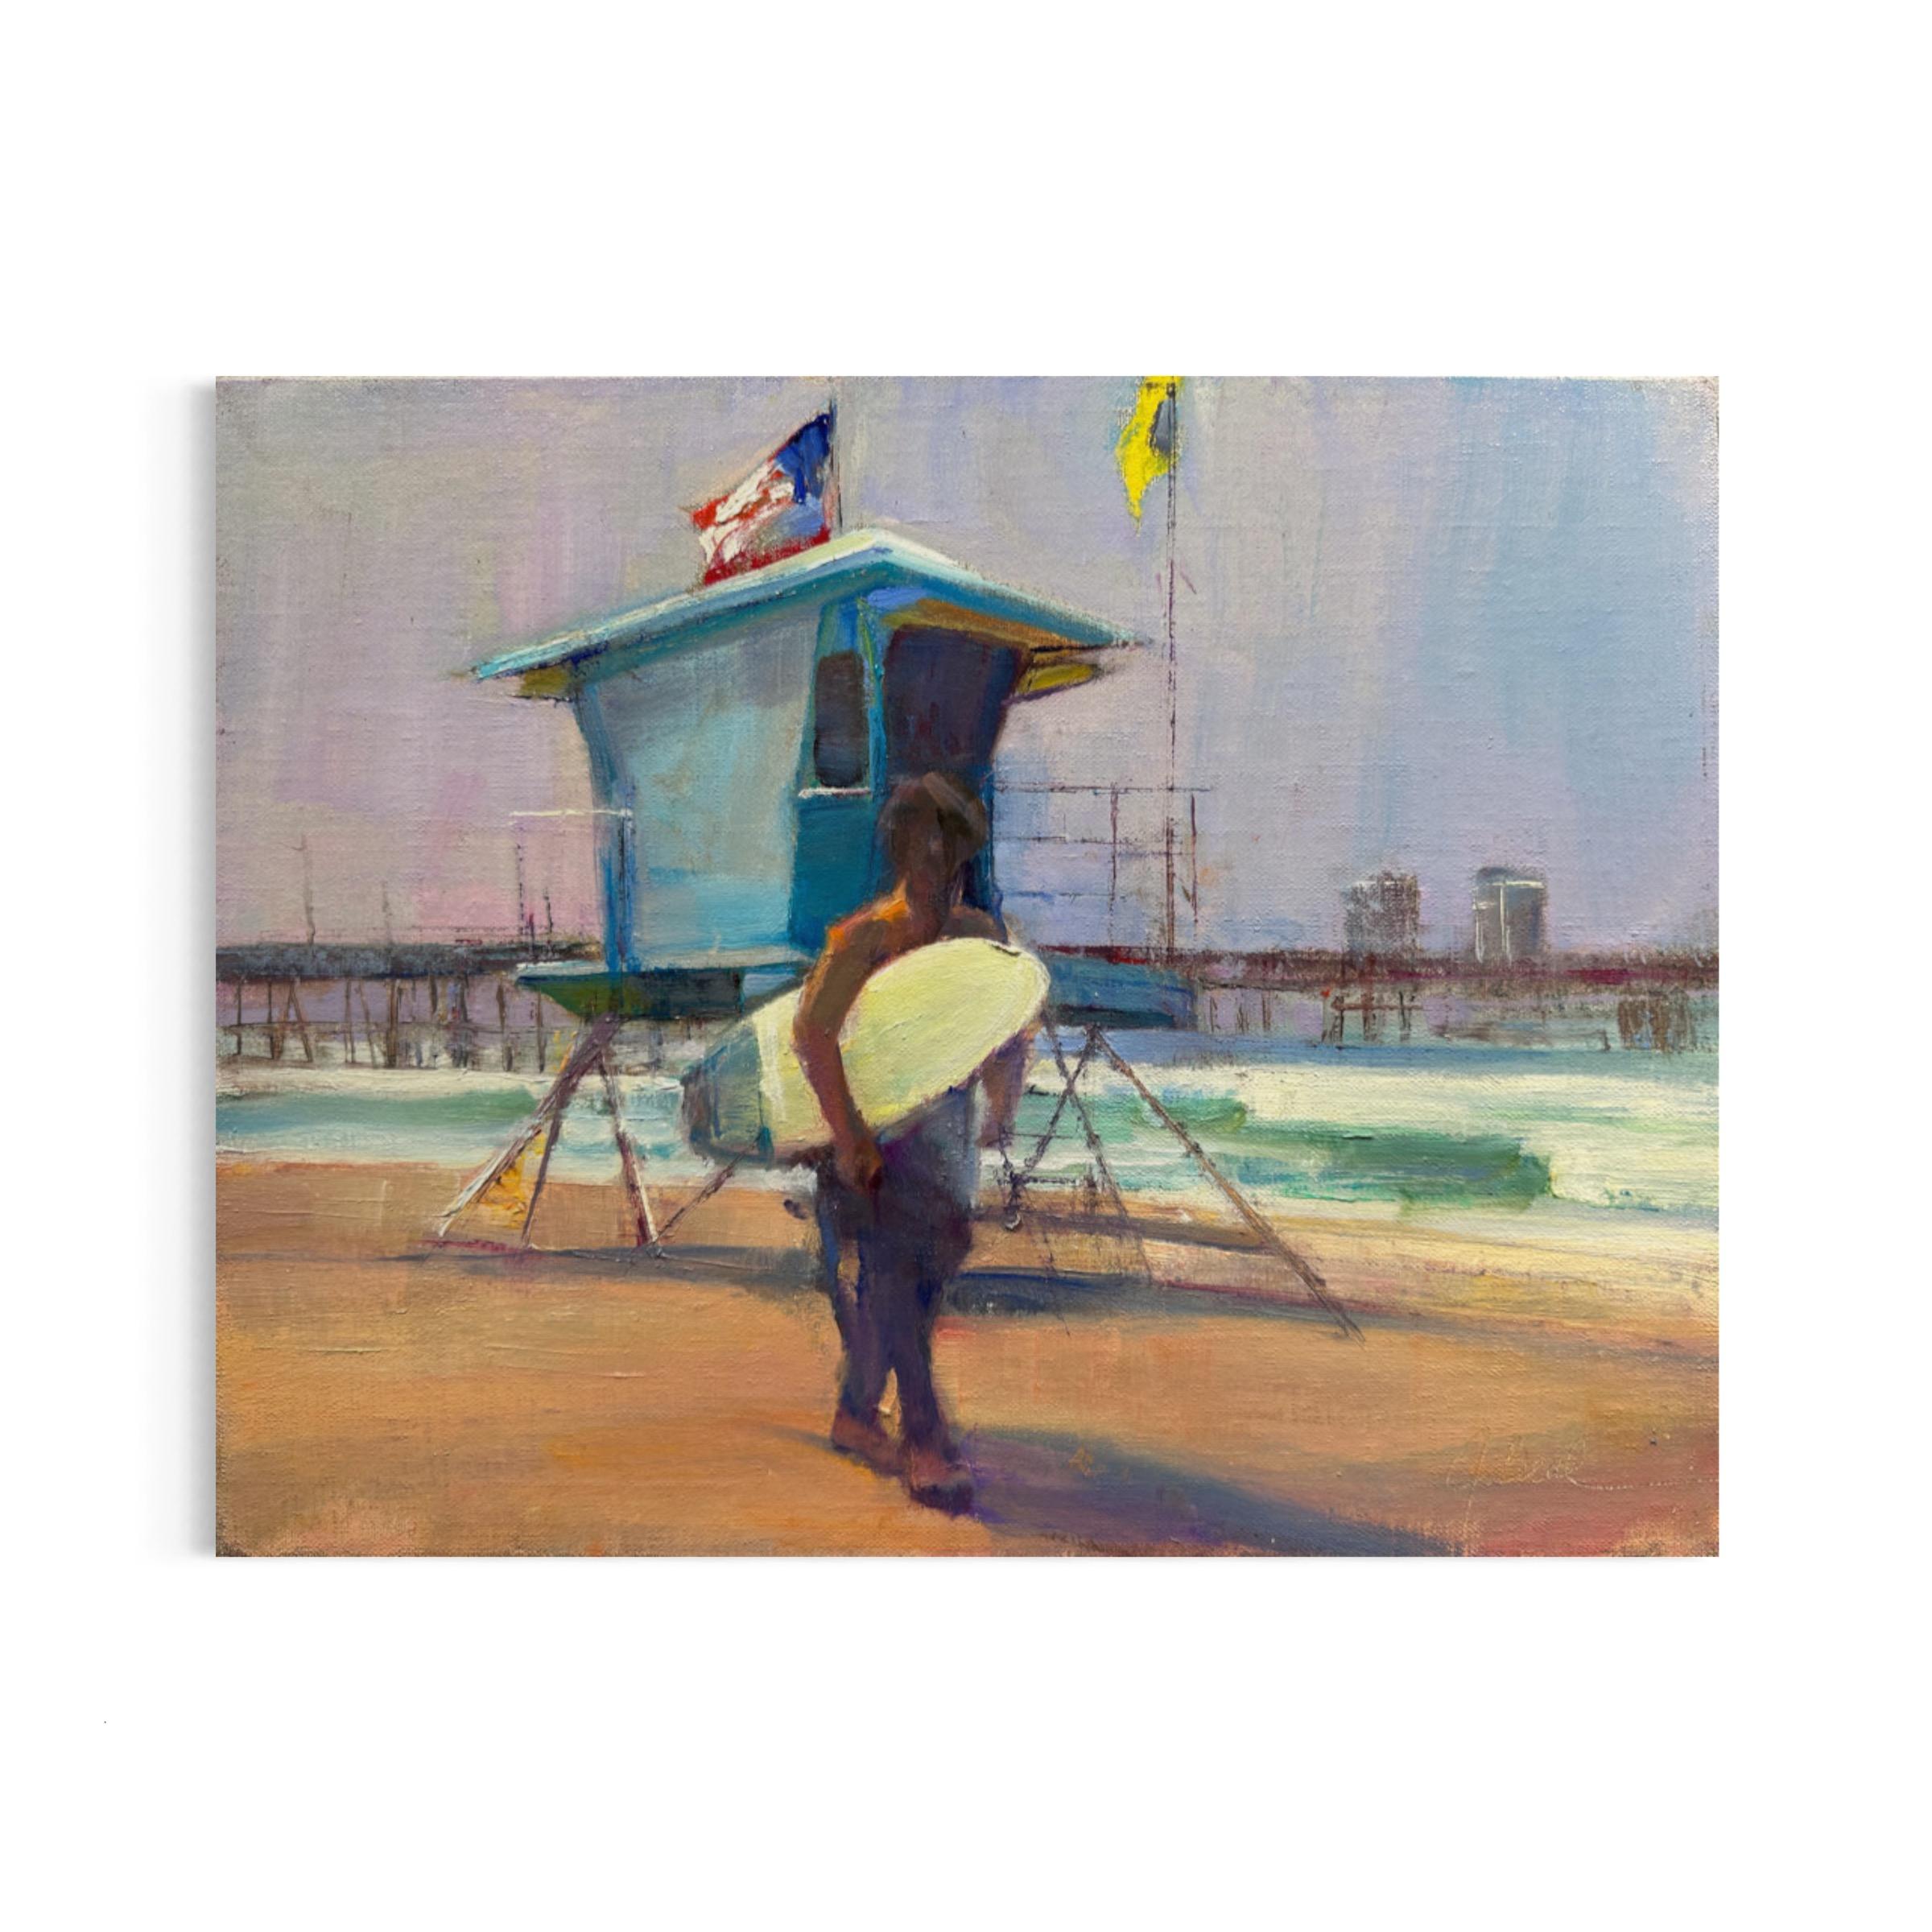 Joli Beal Landscape Painting - Tower and Surfer - Oil on Board Plein-Air Painting 2023